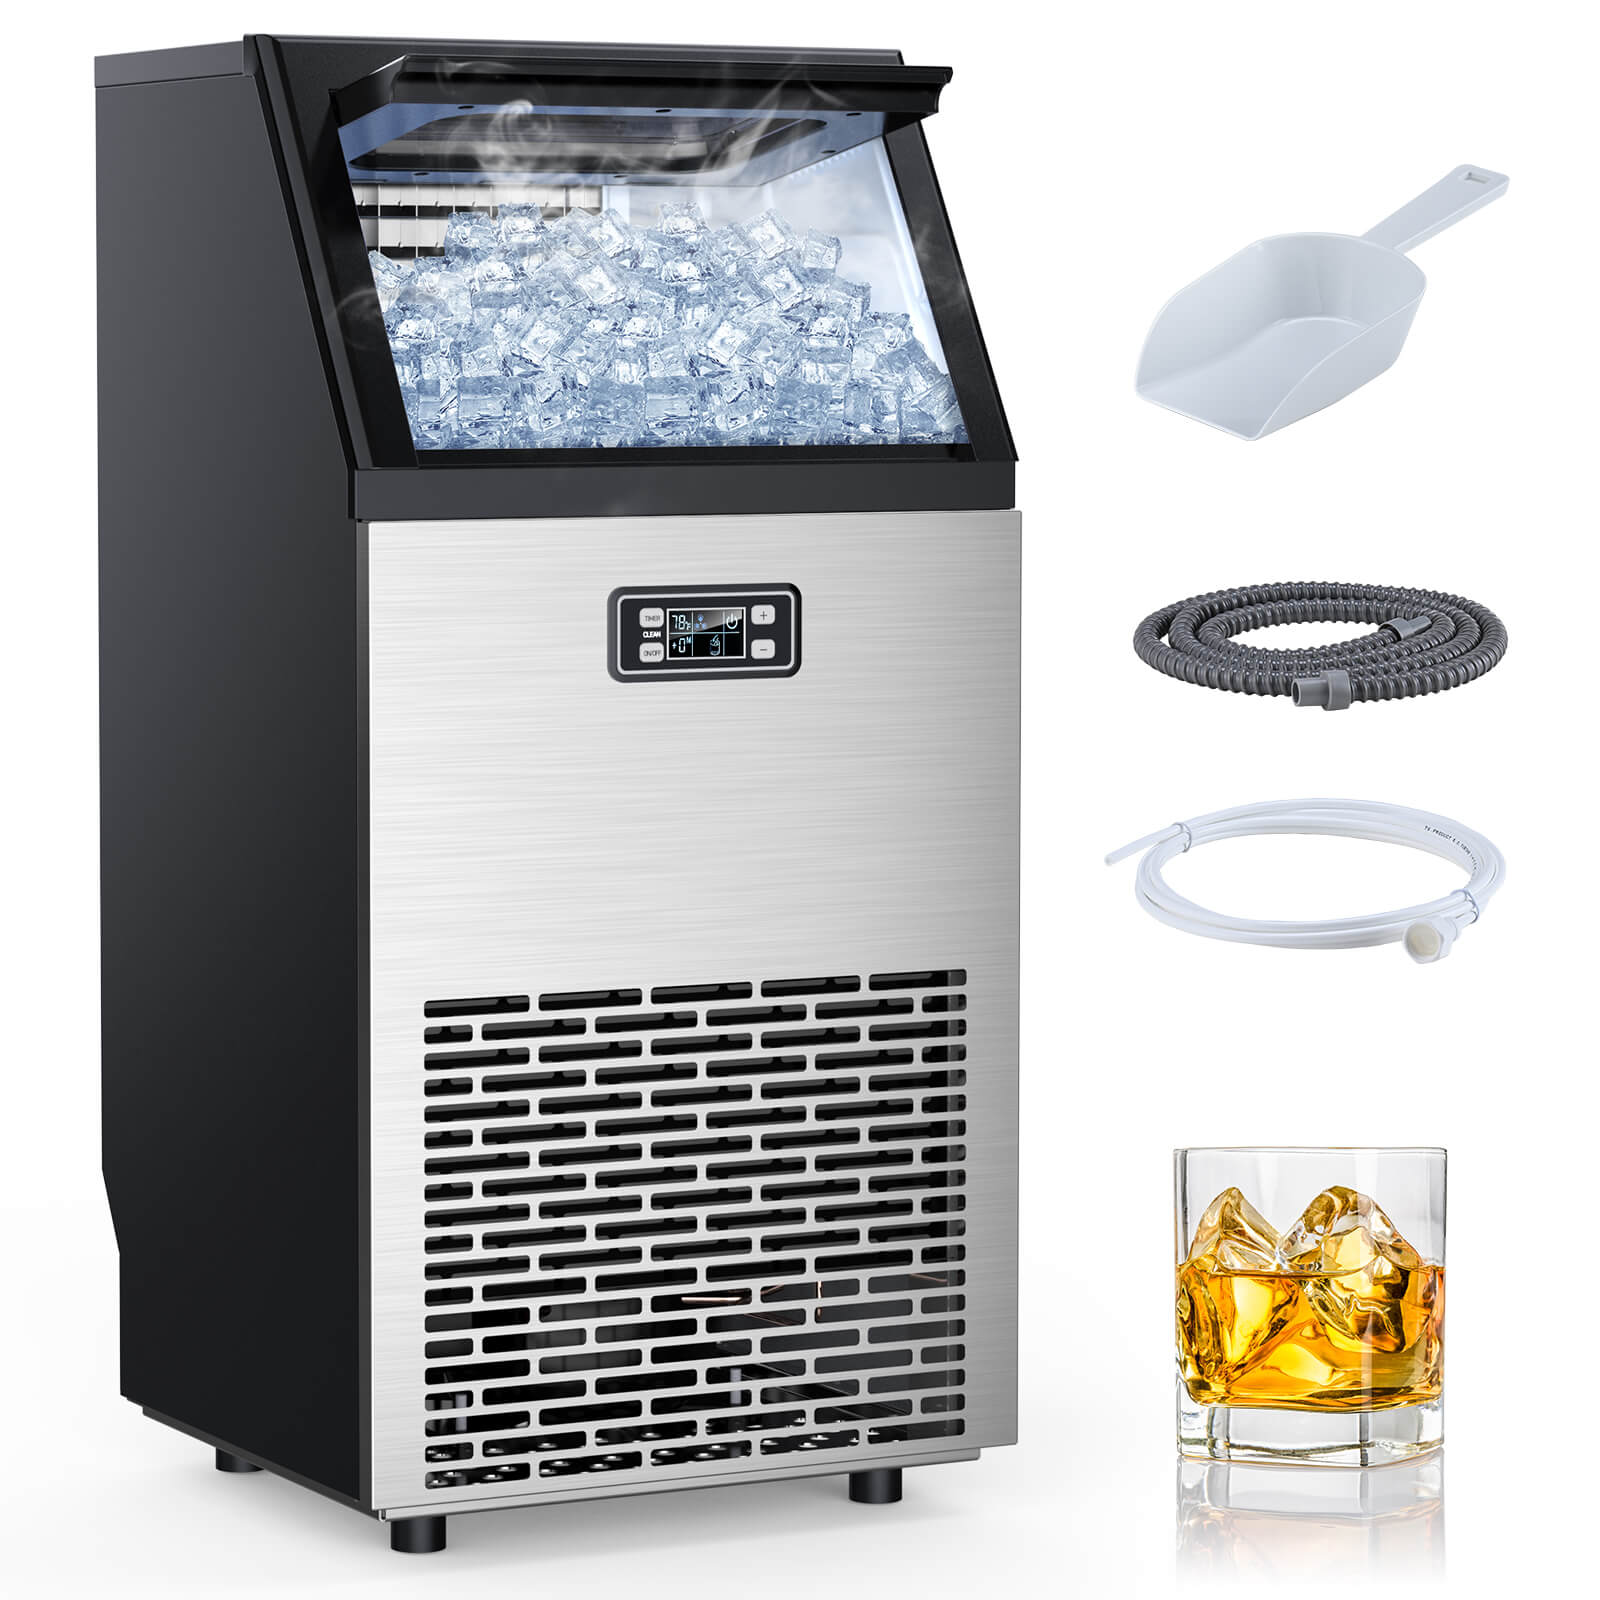 Home Nugget Ice Makers & Commercial Ice Maker Machines – Kismile